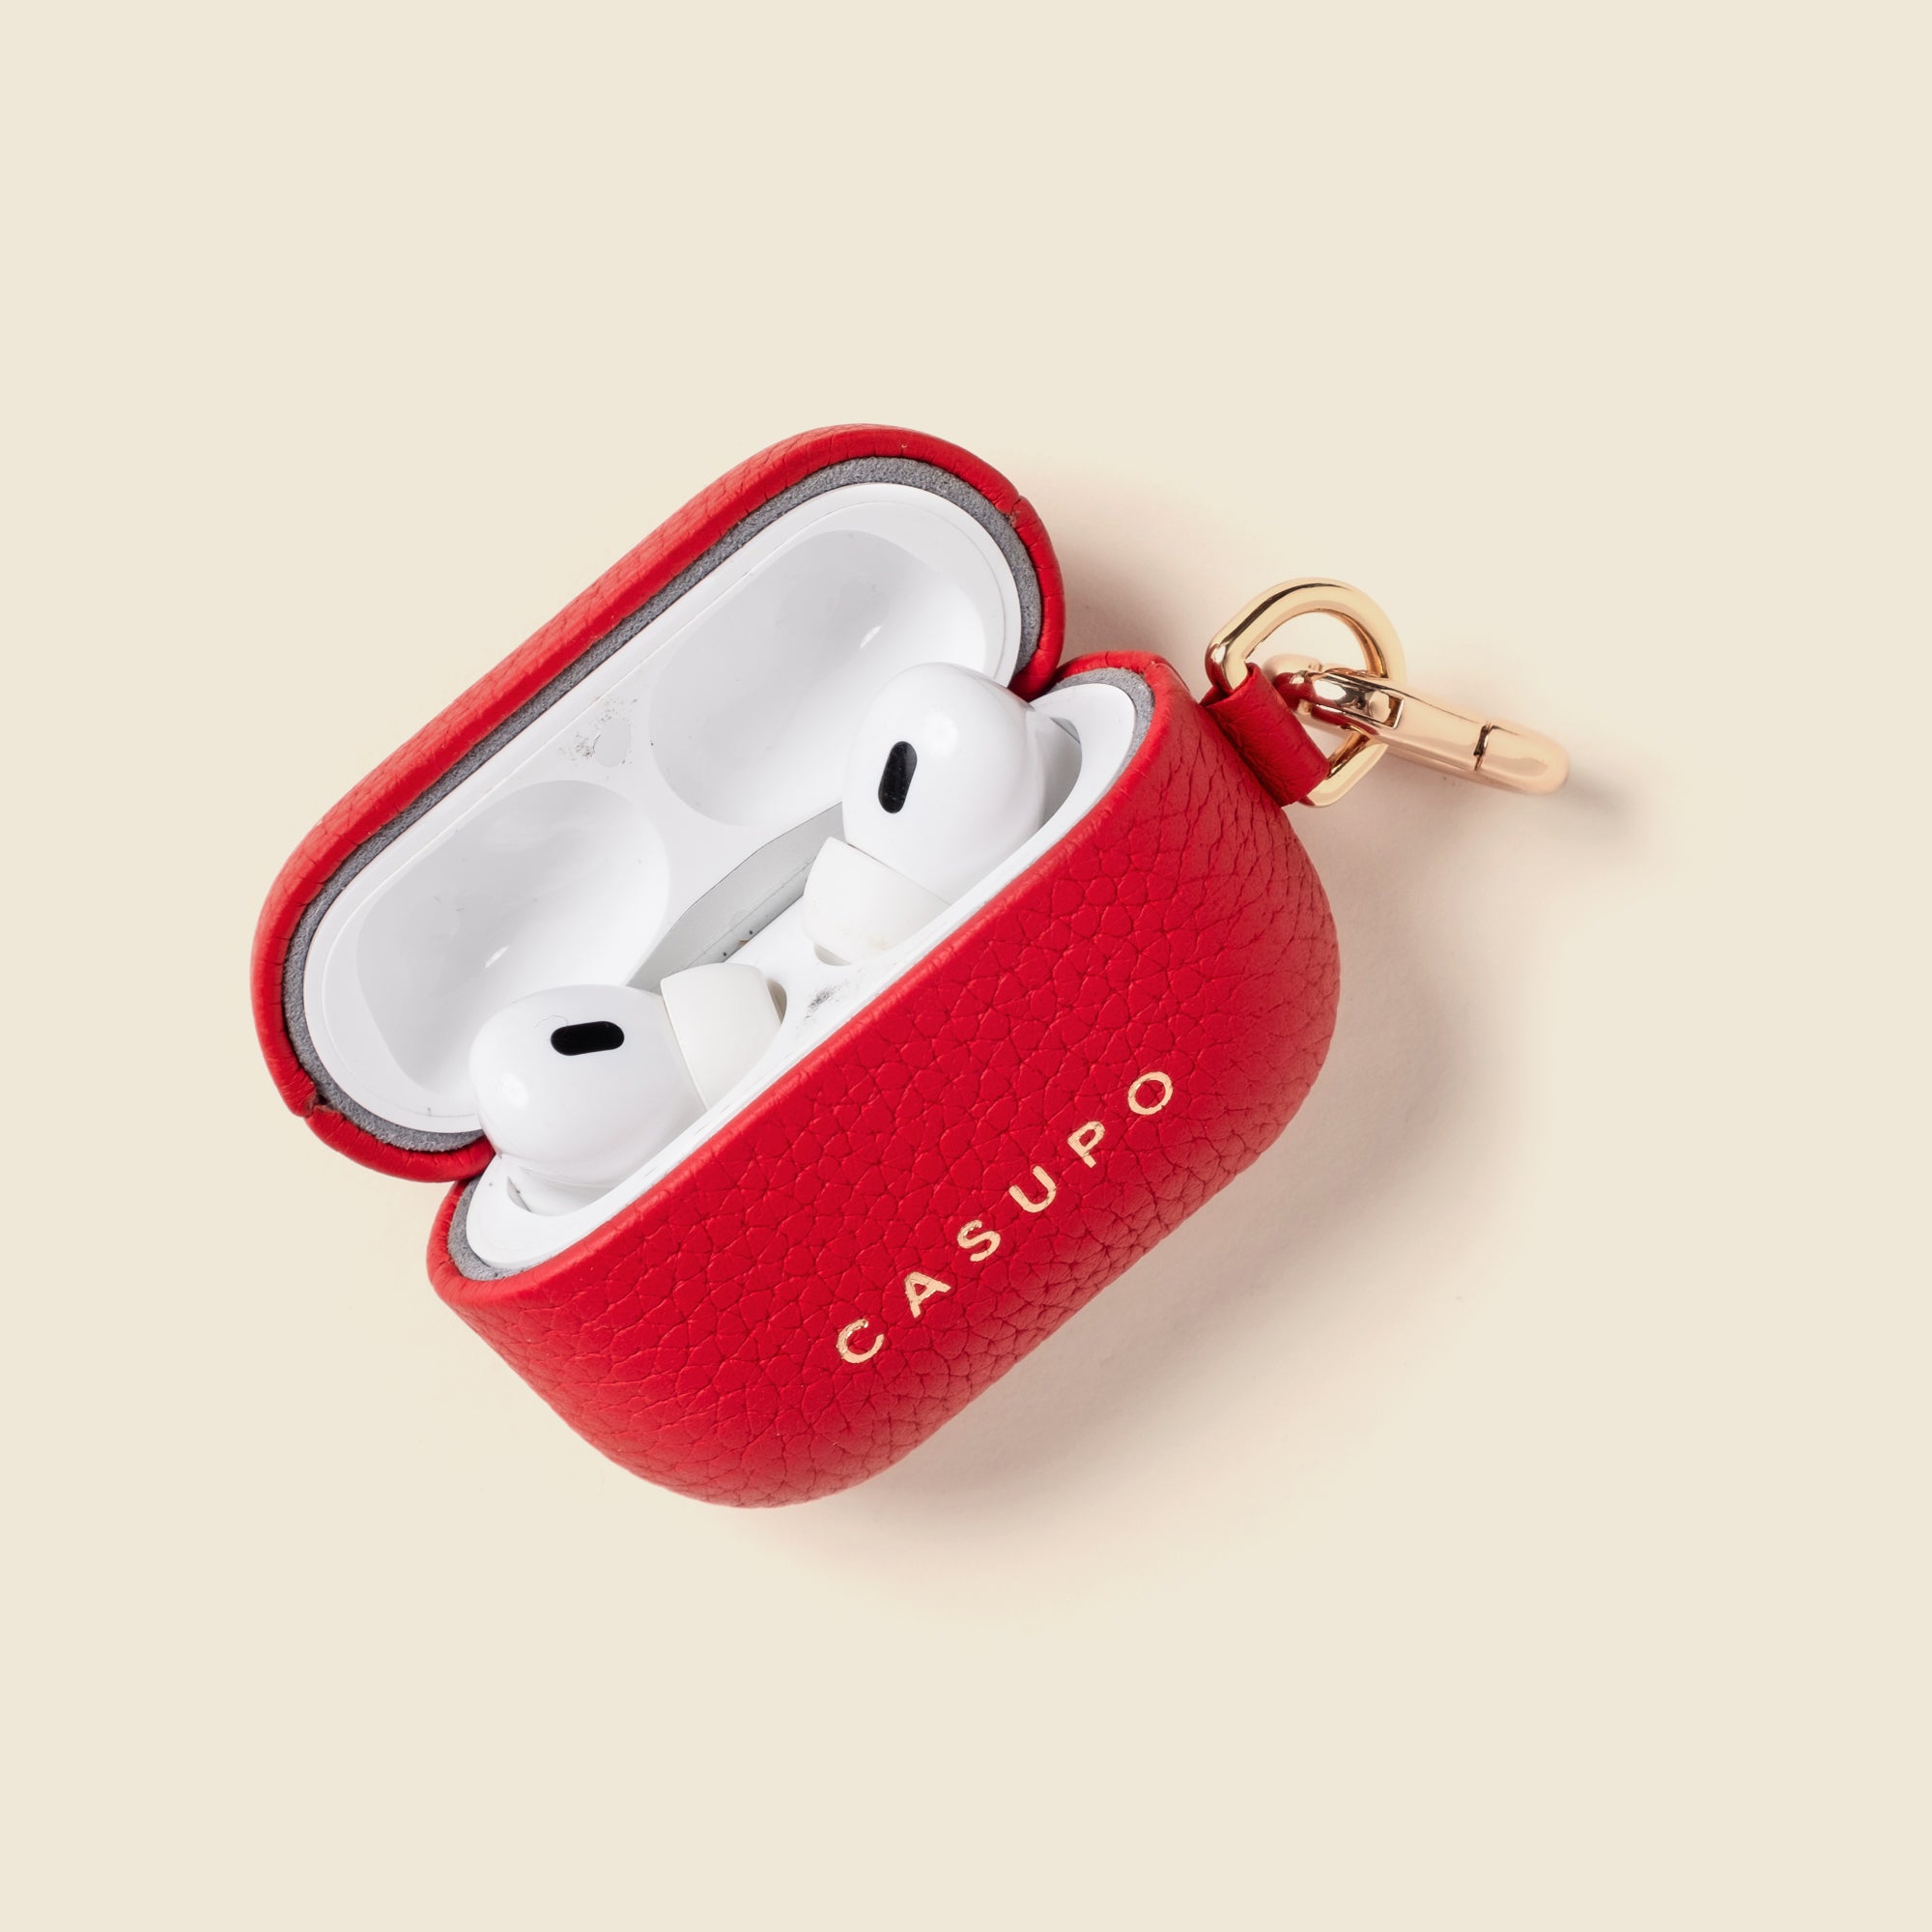 red leather airpod case with key ring